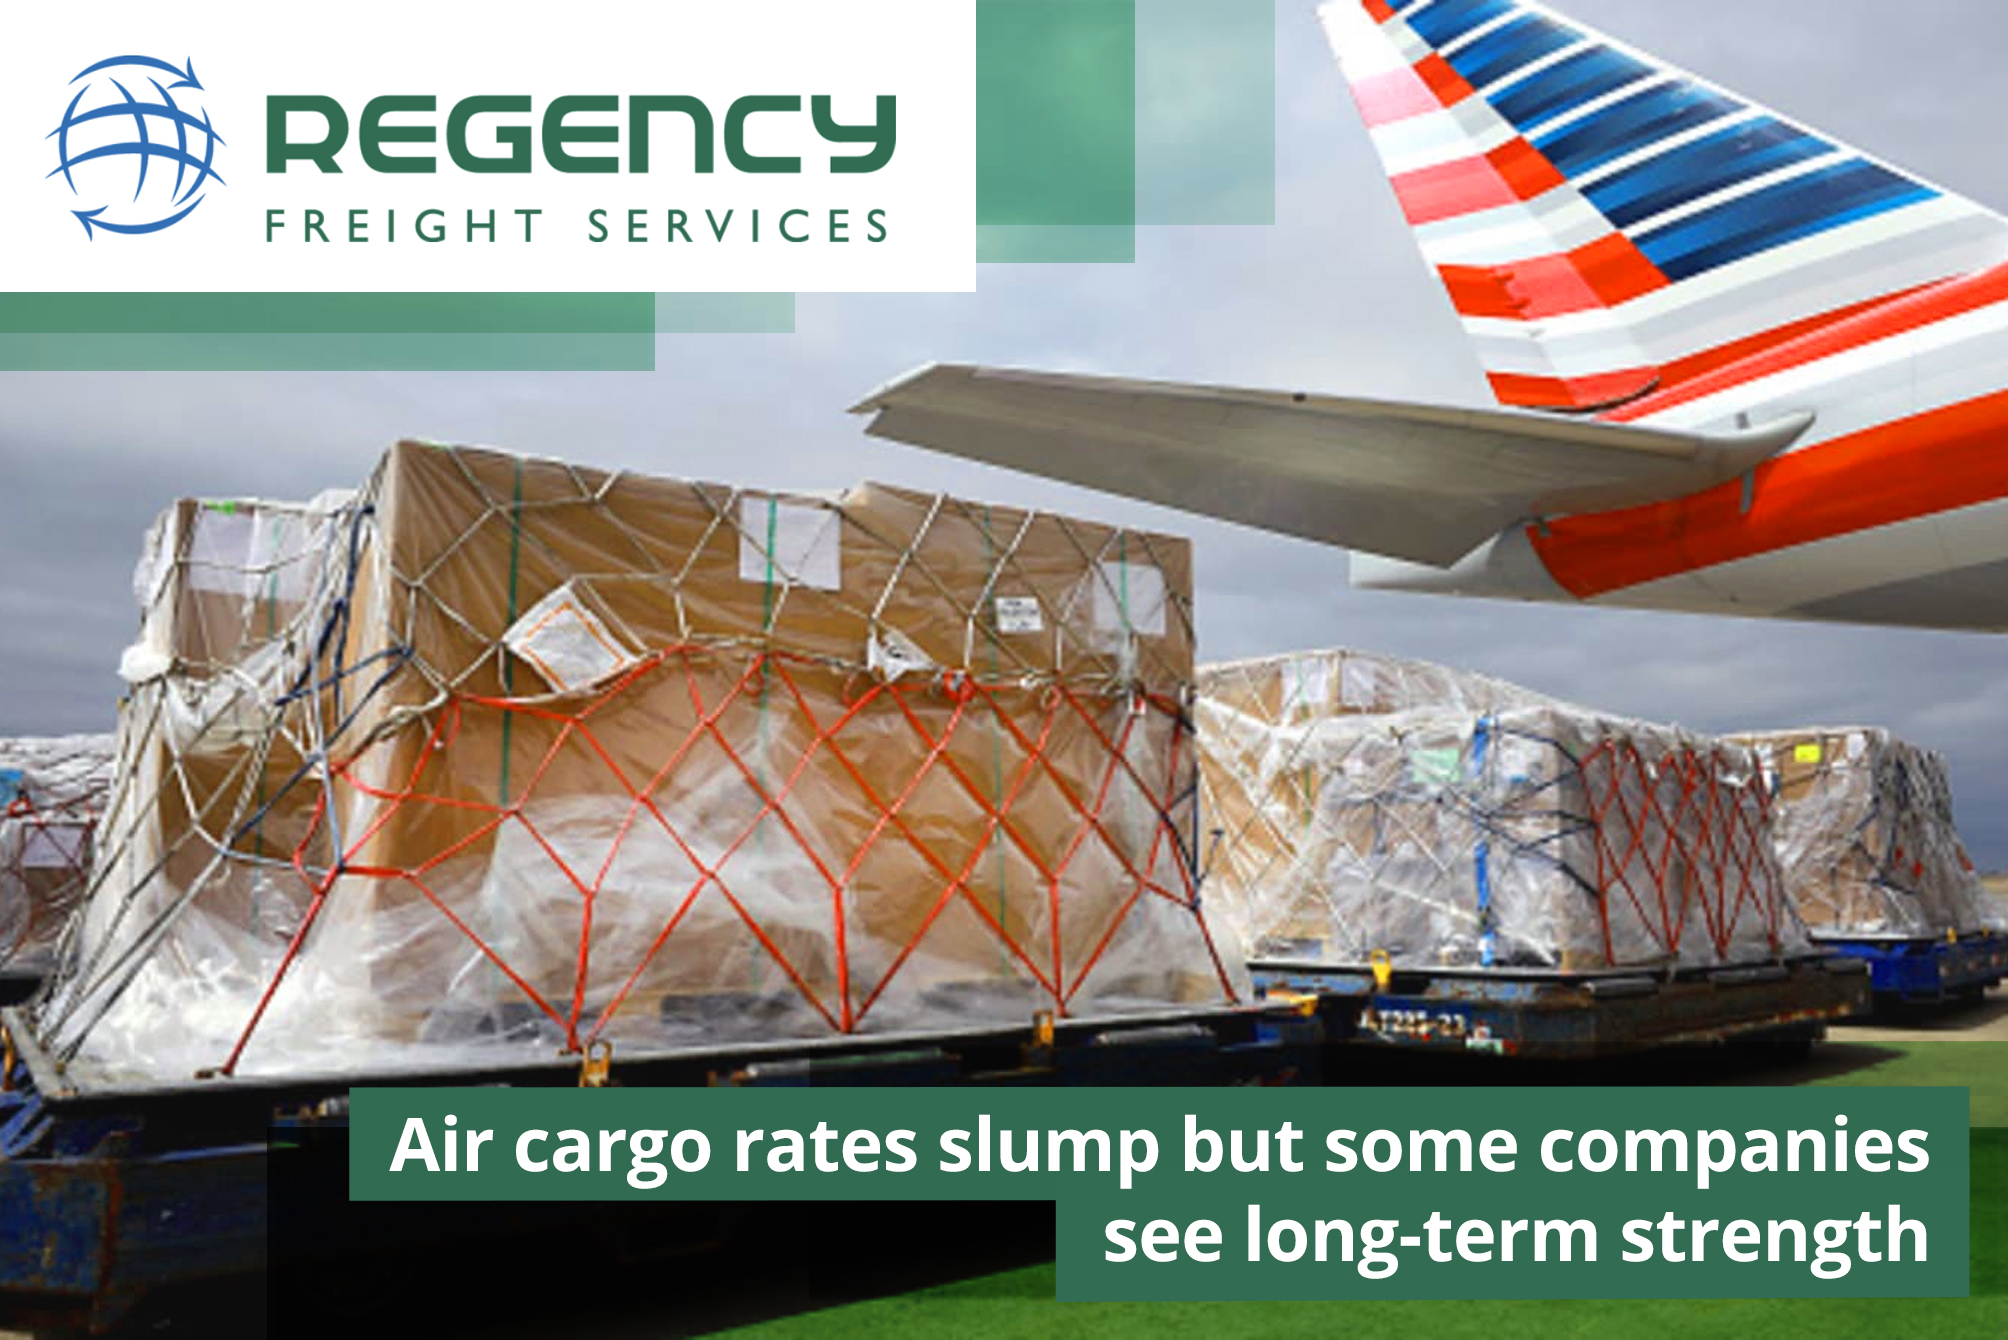 Air cargo rates slump but some companies see long-term strength